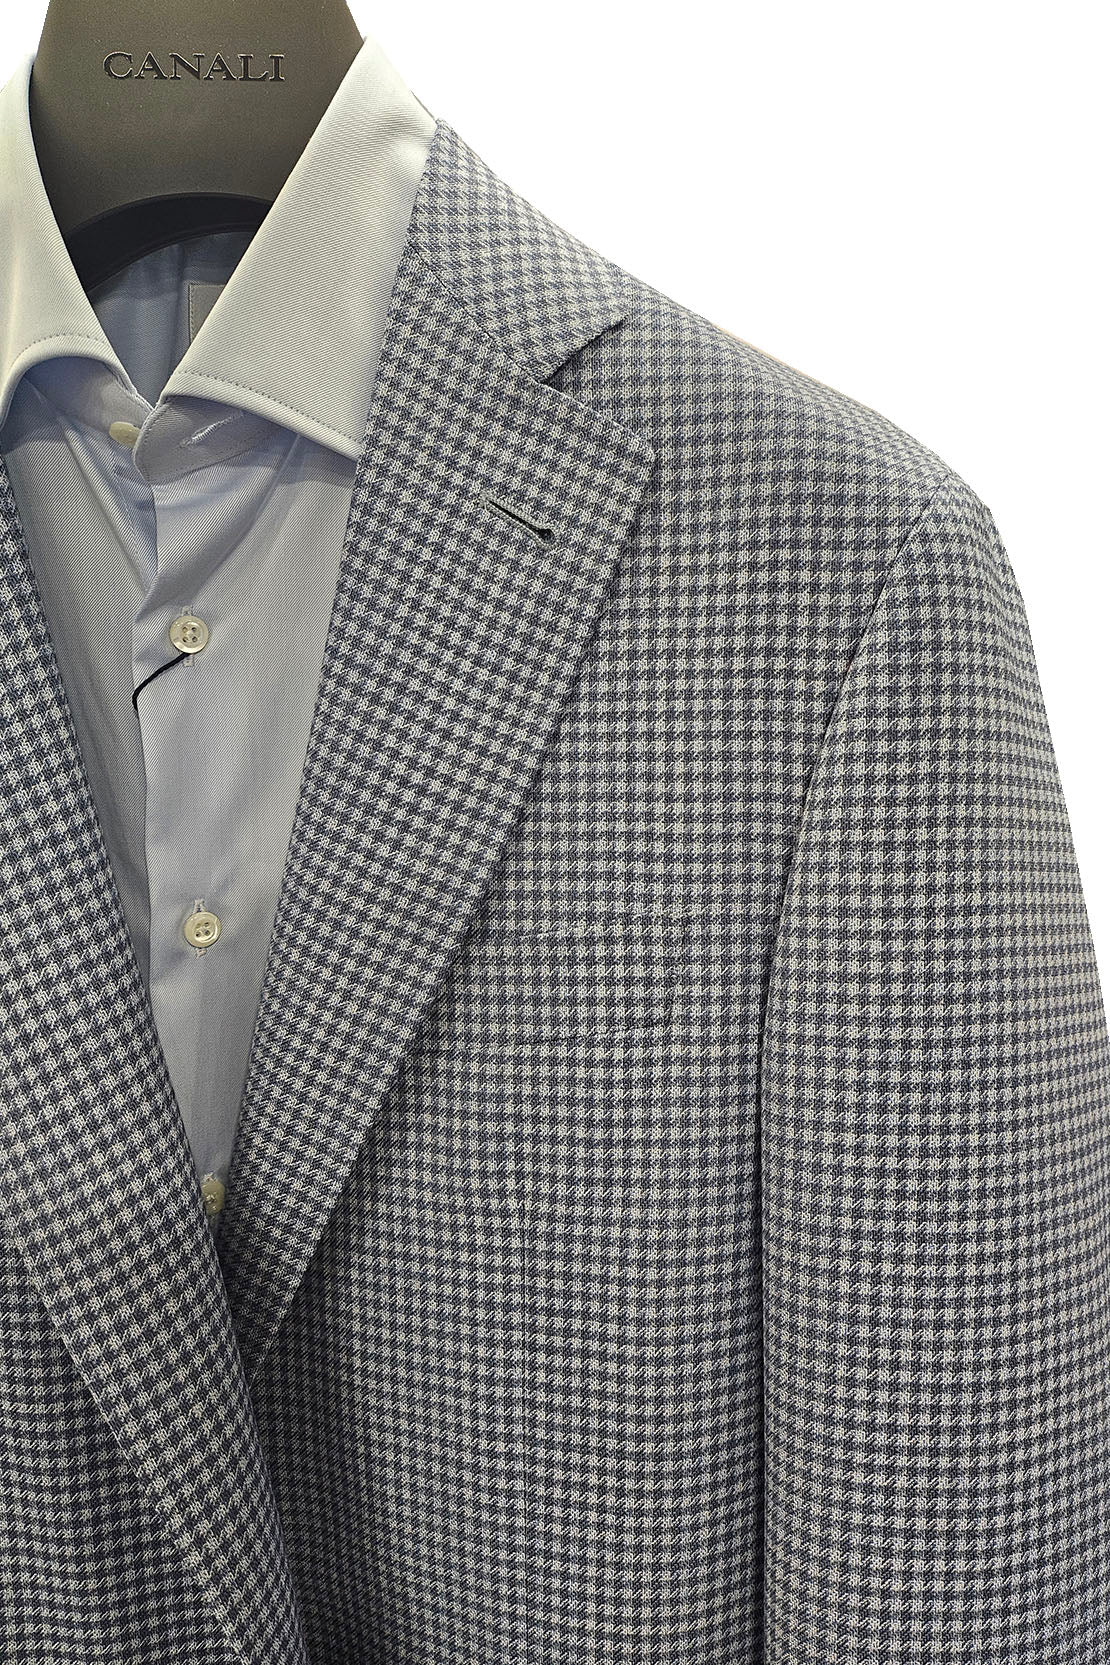 CANALI - Sky Blue Houndstooth Linen and Wool KEI 2 Button Jacket 13275-CF05070.401